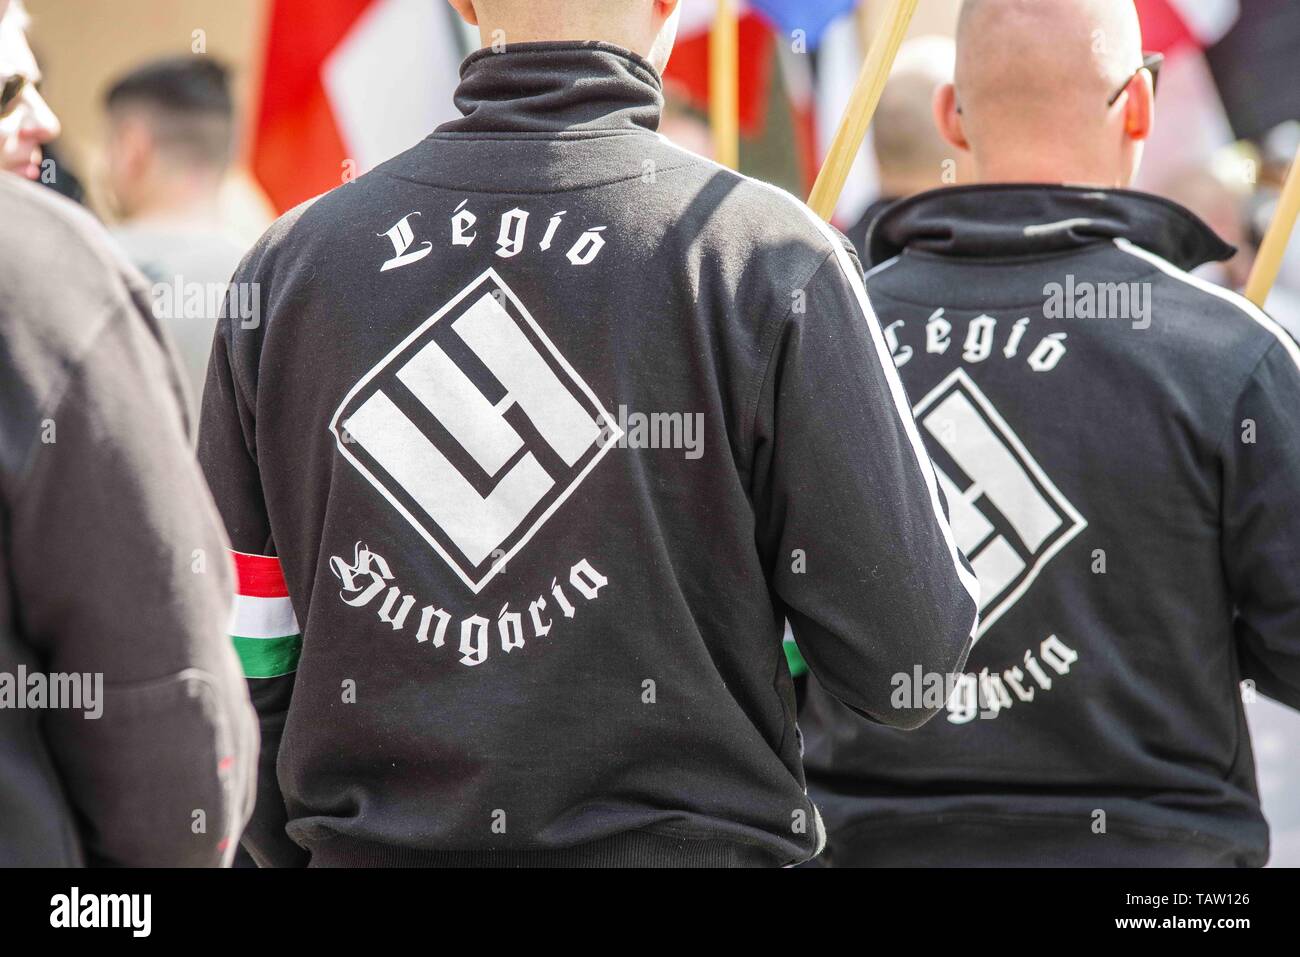 Dortmund, Nordrhein Westfalen, Germany. 25th May, 2019. Neonazis from the Legio Hungaria group as seen in Dortmund, Germany. Prior to the European Elections, the neonazi party Die Rechte (The Right) organized a rally in the German city of Dortmund to promote their candidate, the incarcerated Holocaust denier Ursula Haverbeck. The demonstration and march were organized by prominent local political figure and neonazi activist Michael Brueck (Michael BrÃ¼ck) who enlisted the help of not only German neonazis, but also assistance from Russian, Bulgarian, Hungarian, and Dutch groups with the final Stock Photo